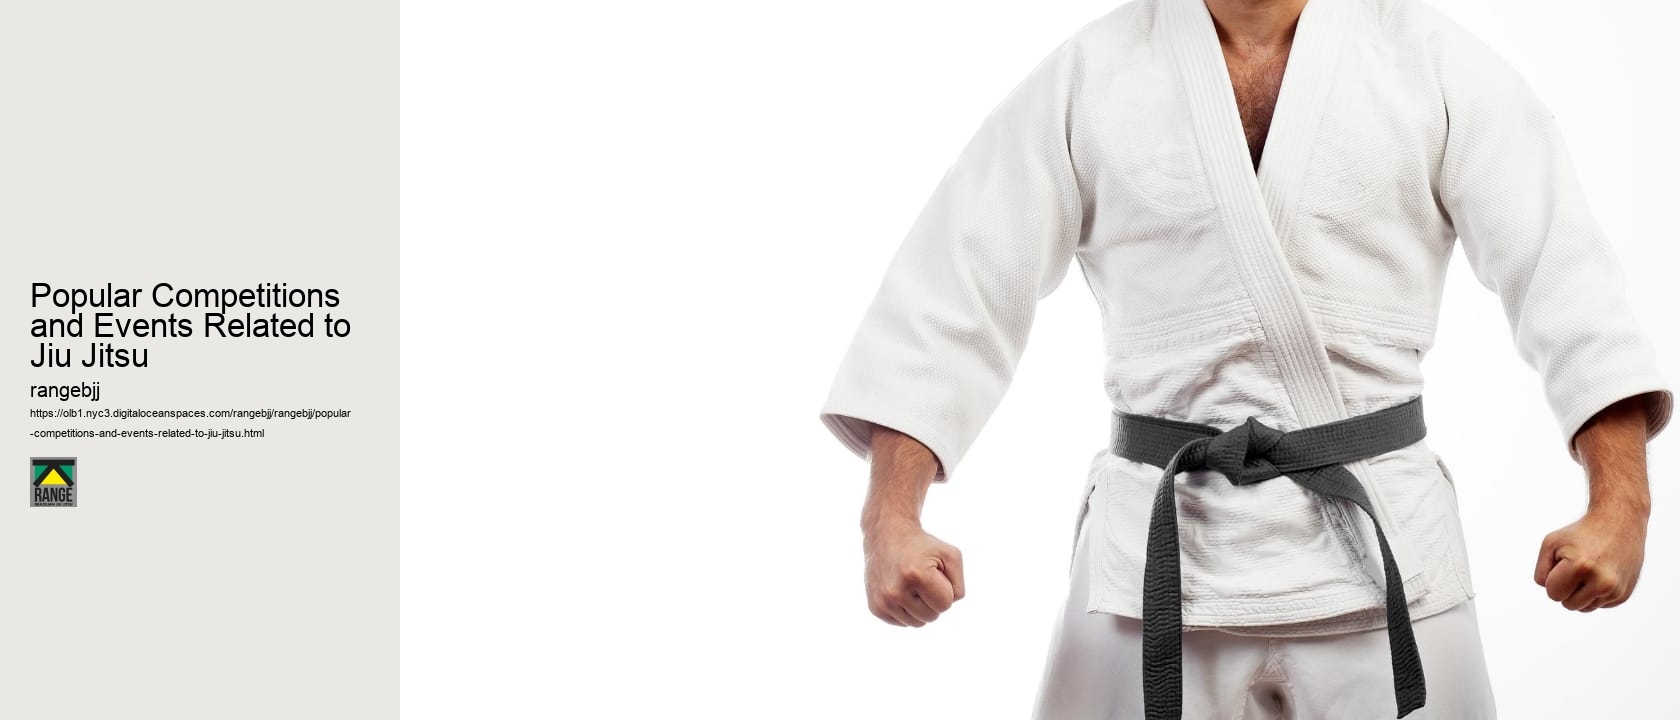 Popular Competitions and Events Related to Jiu Jitsu